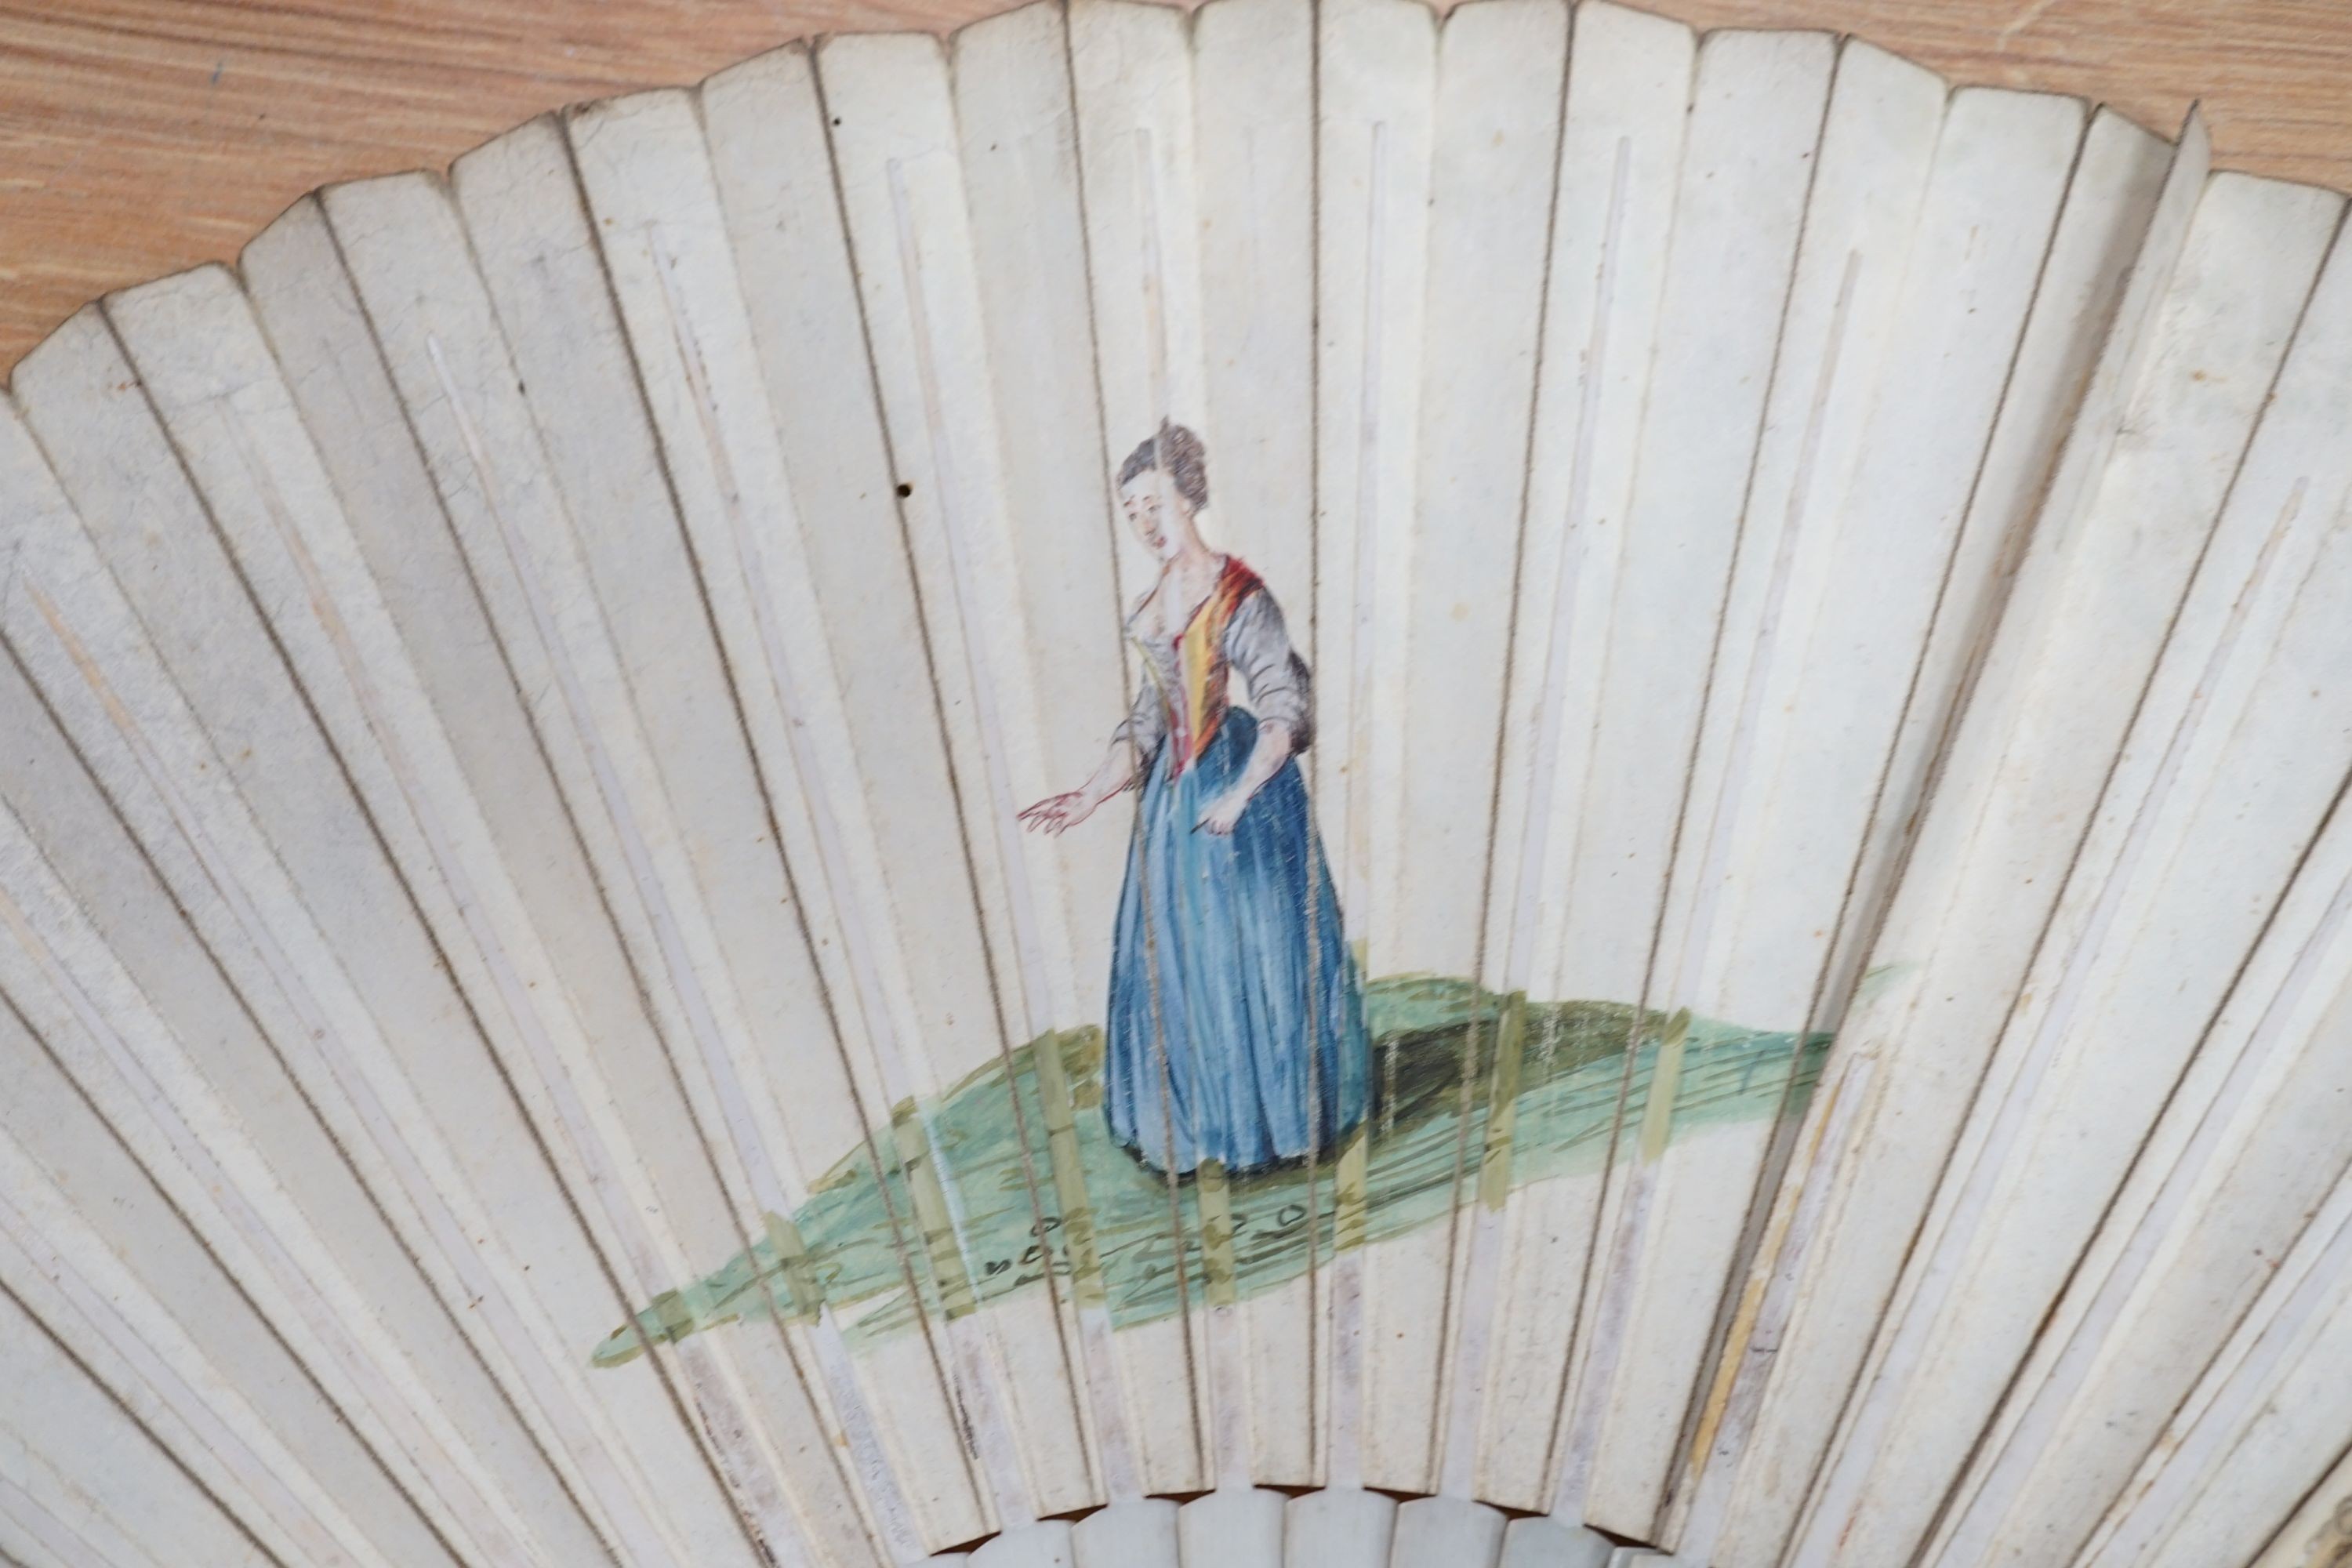 Five various fans, and an 18th century painted leaf fan with ivory chinoiserie decorated guards and sticks, 28 cms high (6)